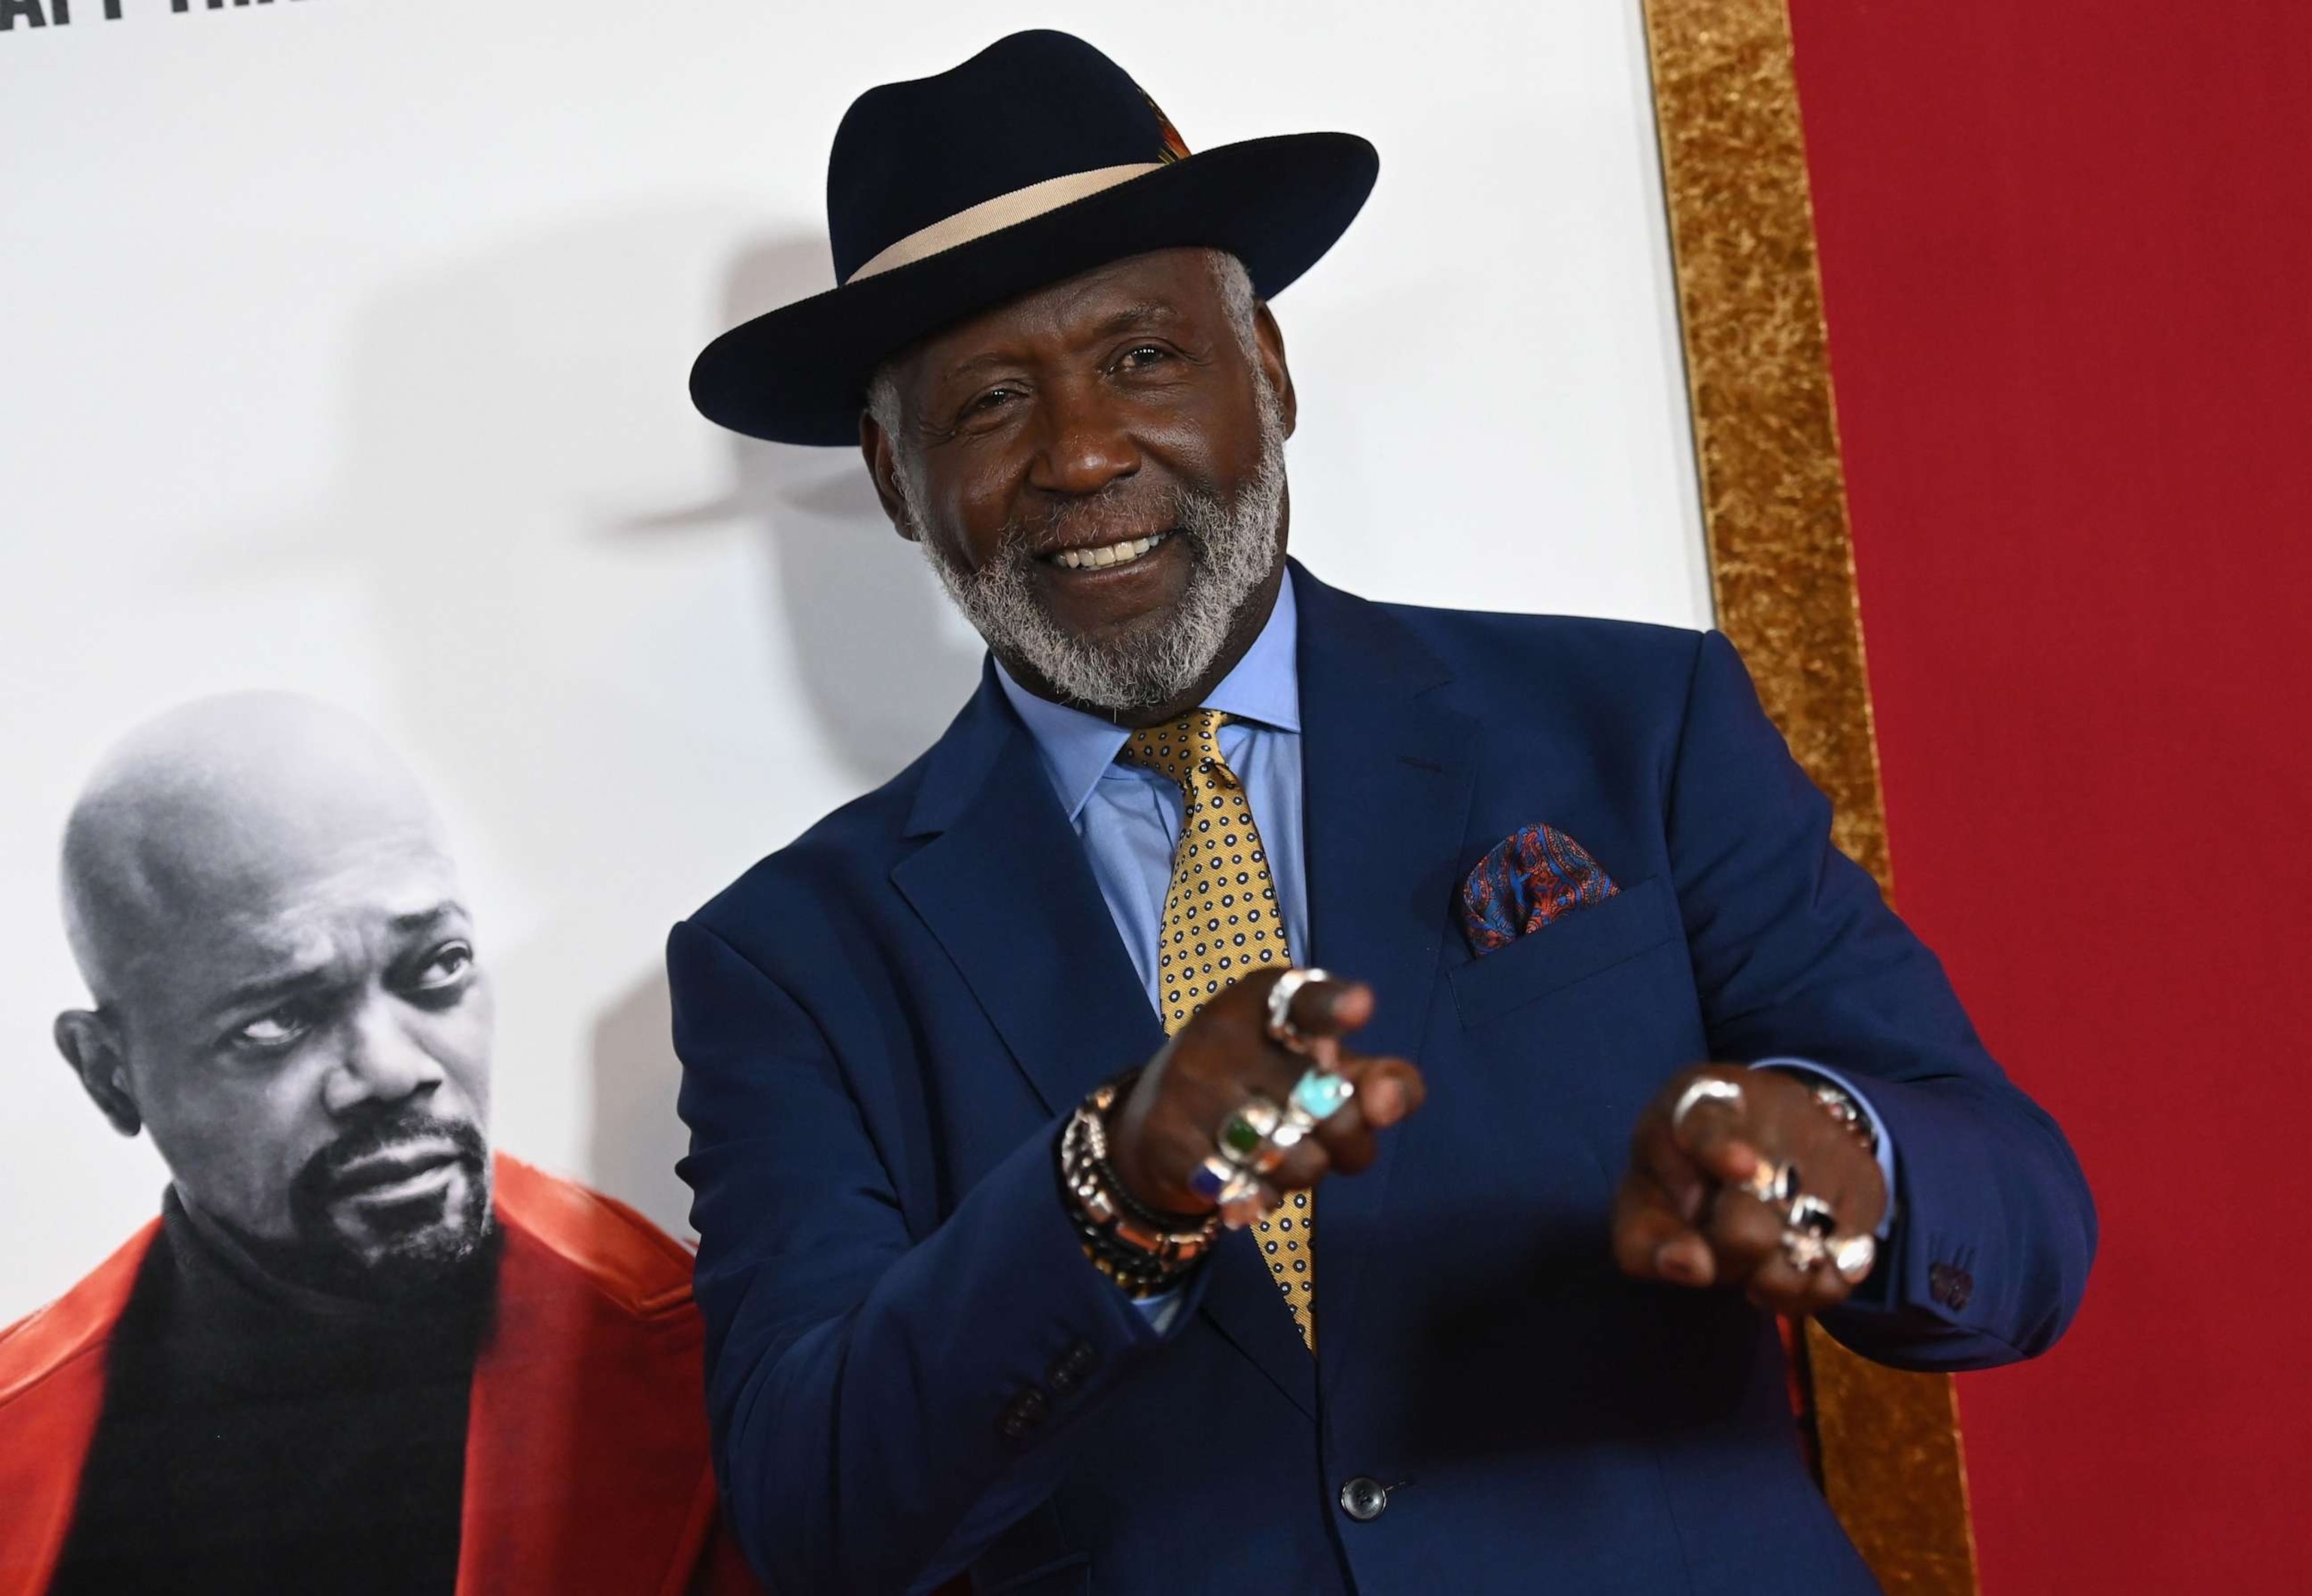 PHOTO: Richard Roundtree attends the premiere of "Shaft" at AMC Lincoln Square on June 10, 2019 in New York City. (Photo by Angela Weiss / AFP) (PHOTO: ANGELA WEISS/AFP via Getty Images)